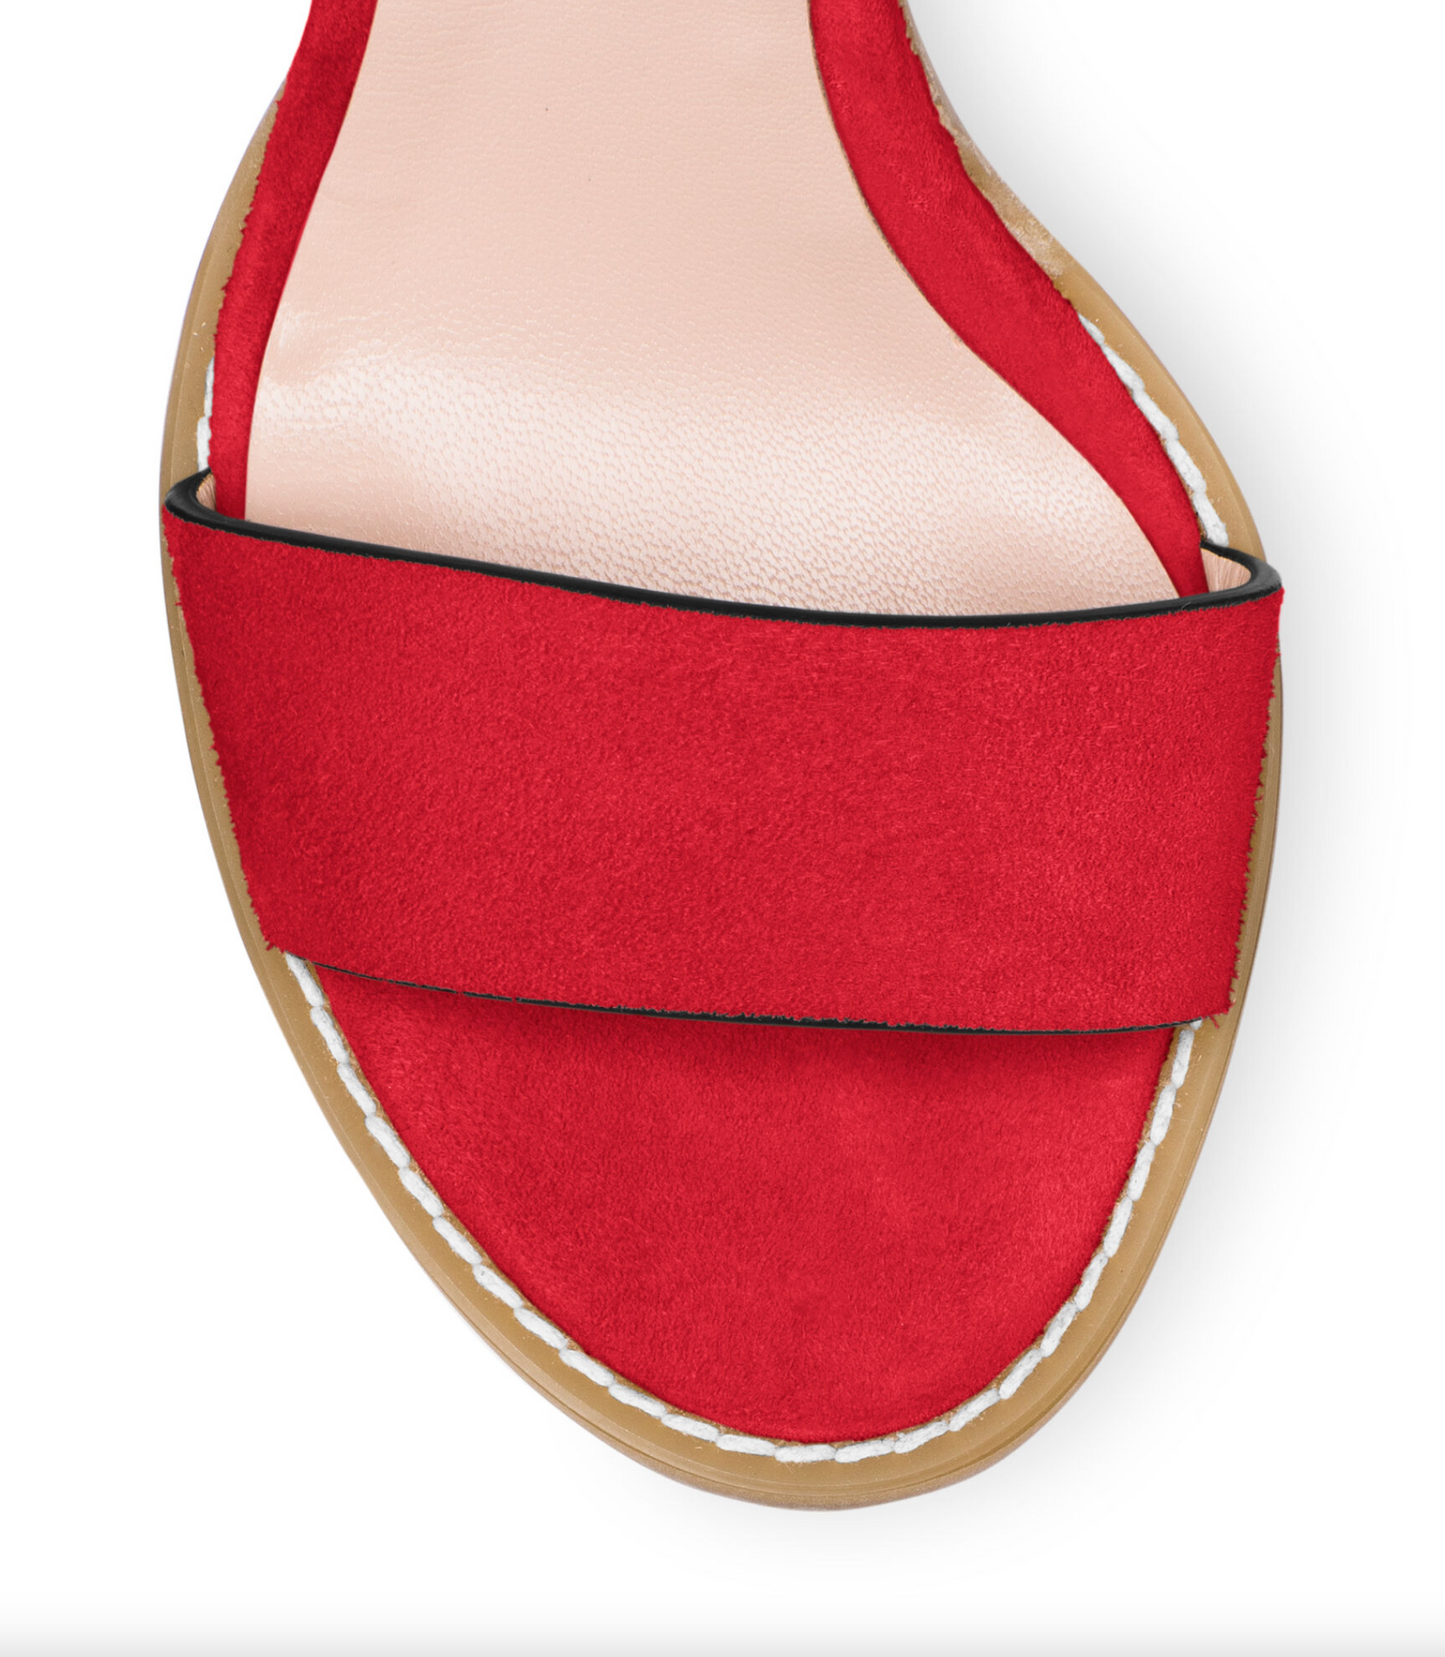 Chic Suede Lug Sole Winona Sandals in Red